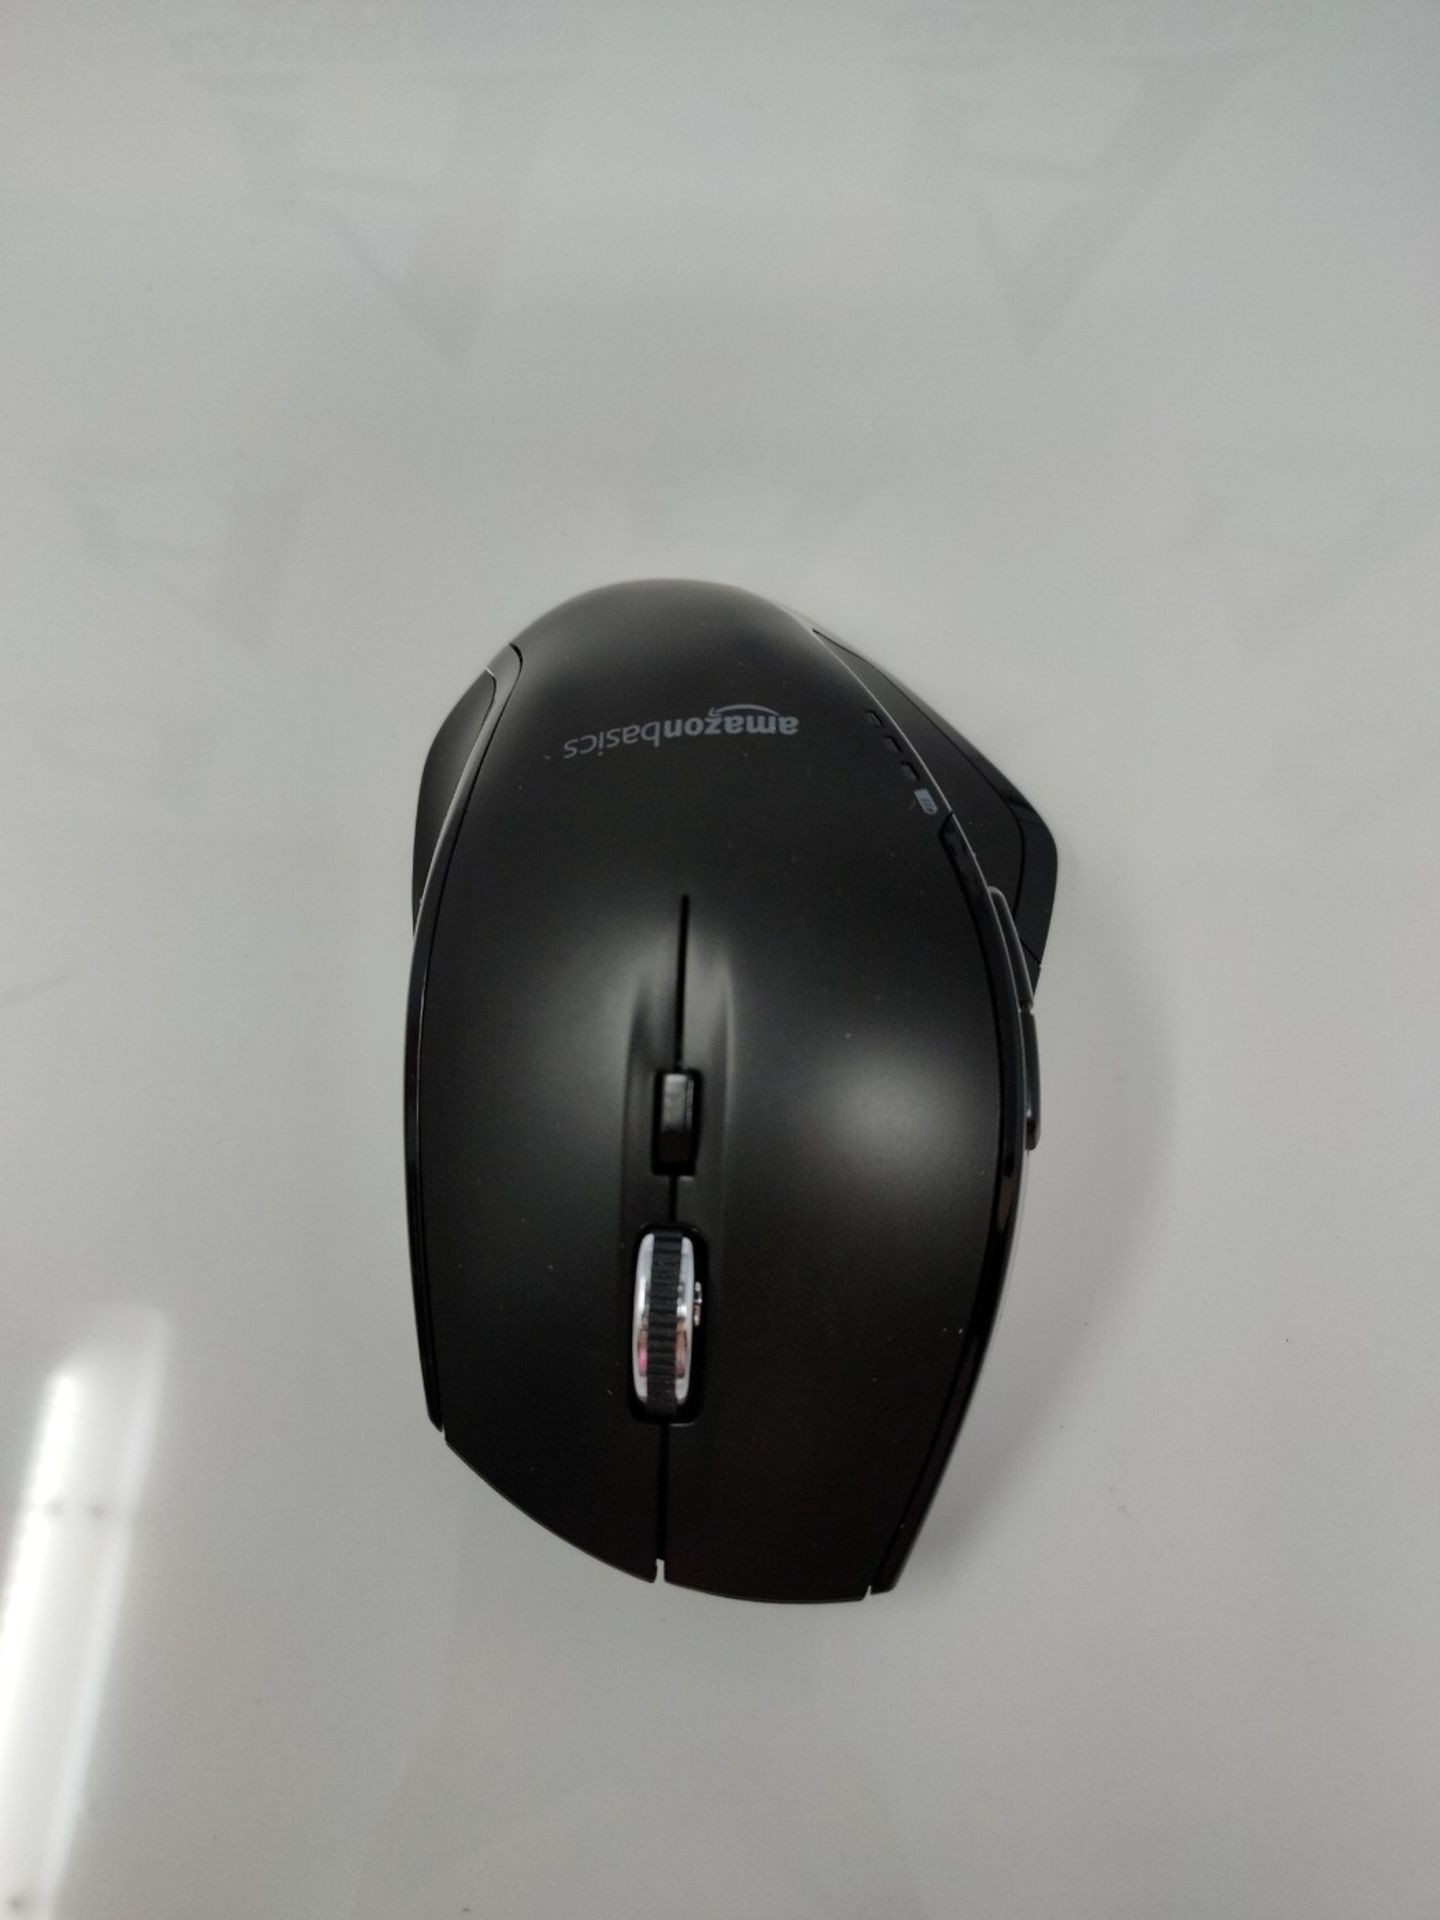 [INCOMPLETE] Amazon Basics - Ergonomische kabellose Maus mit Schnell-Scrolling, normal - Image 2 of 2